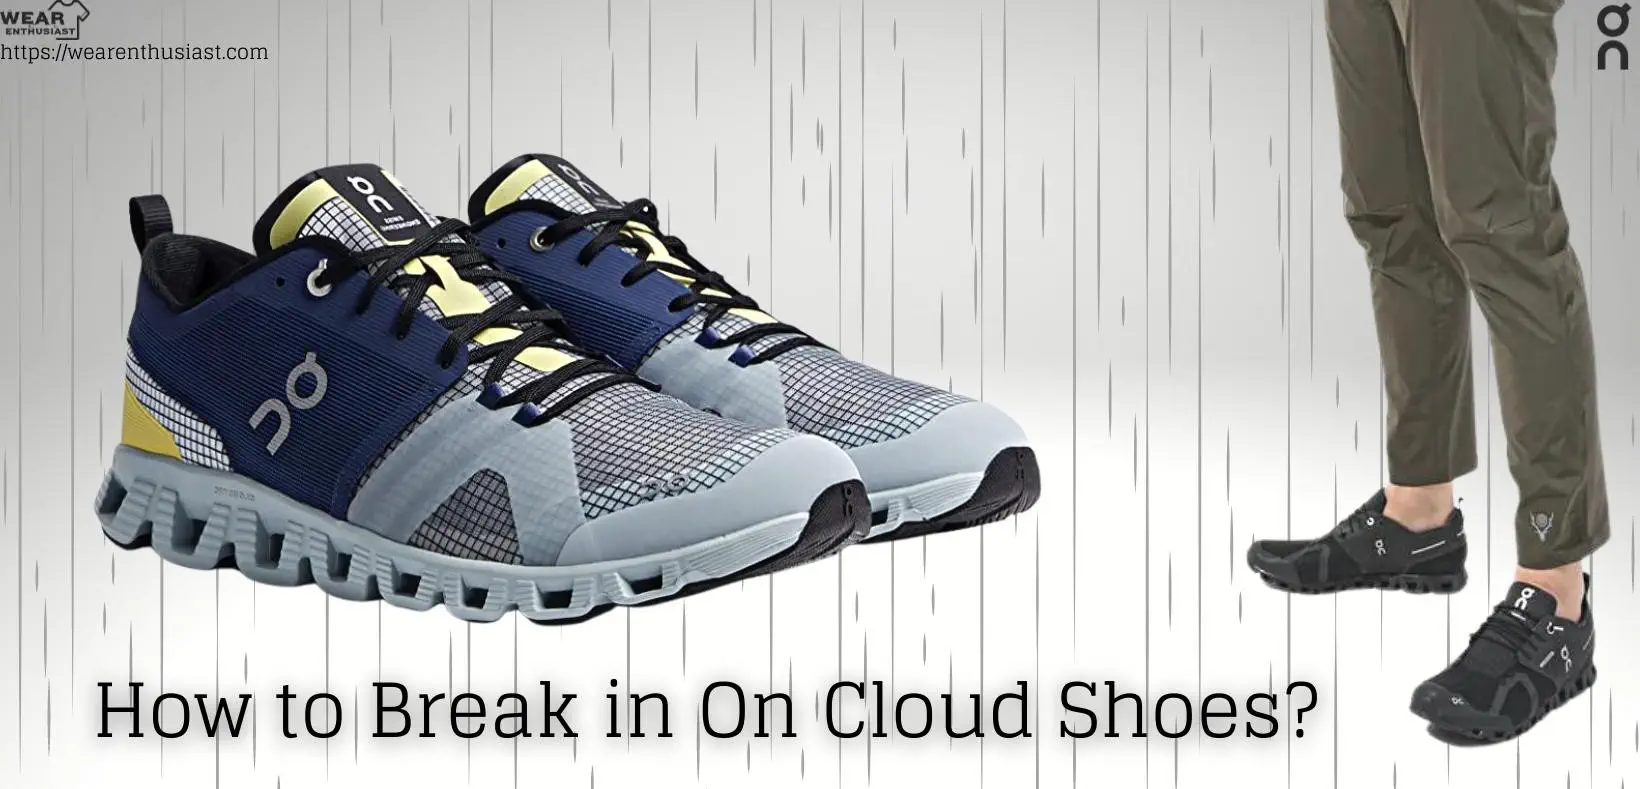 How to Break in On Cloud Shoes?